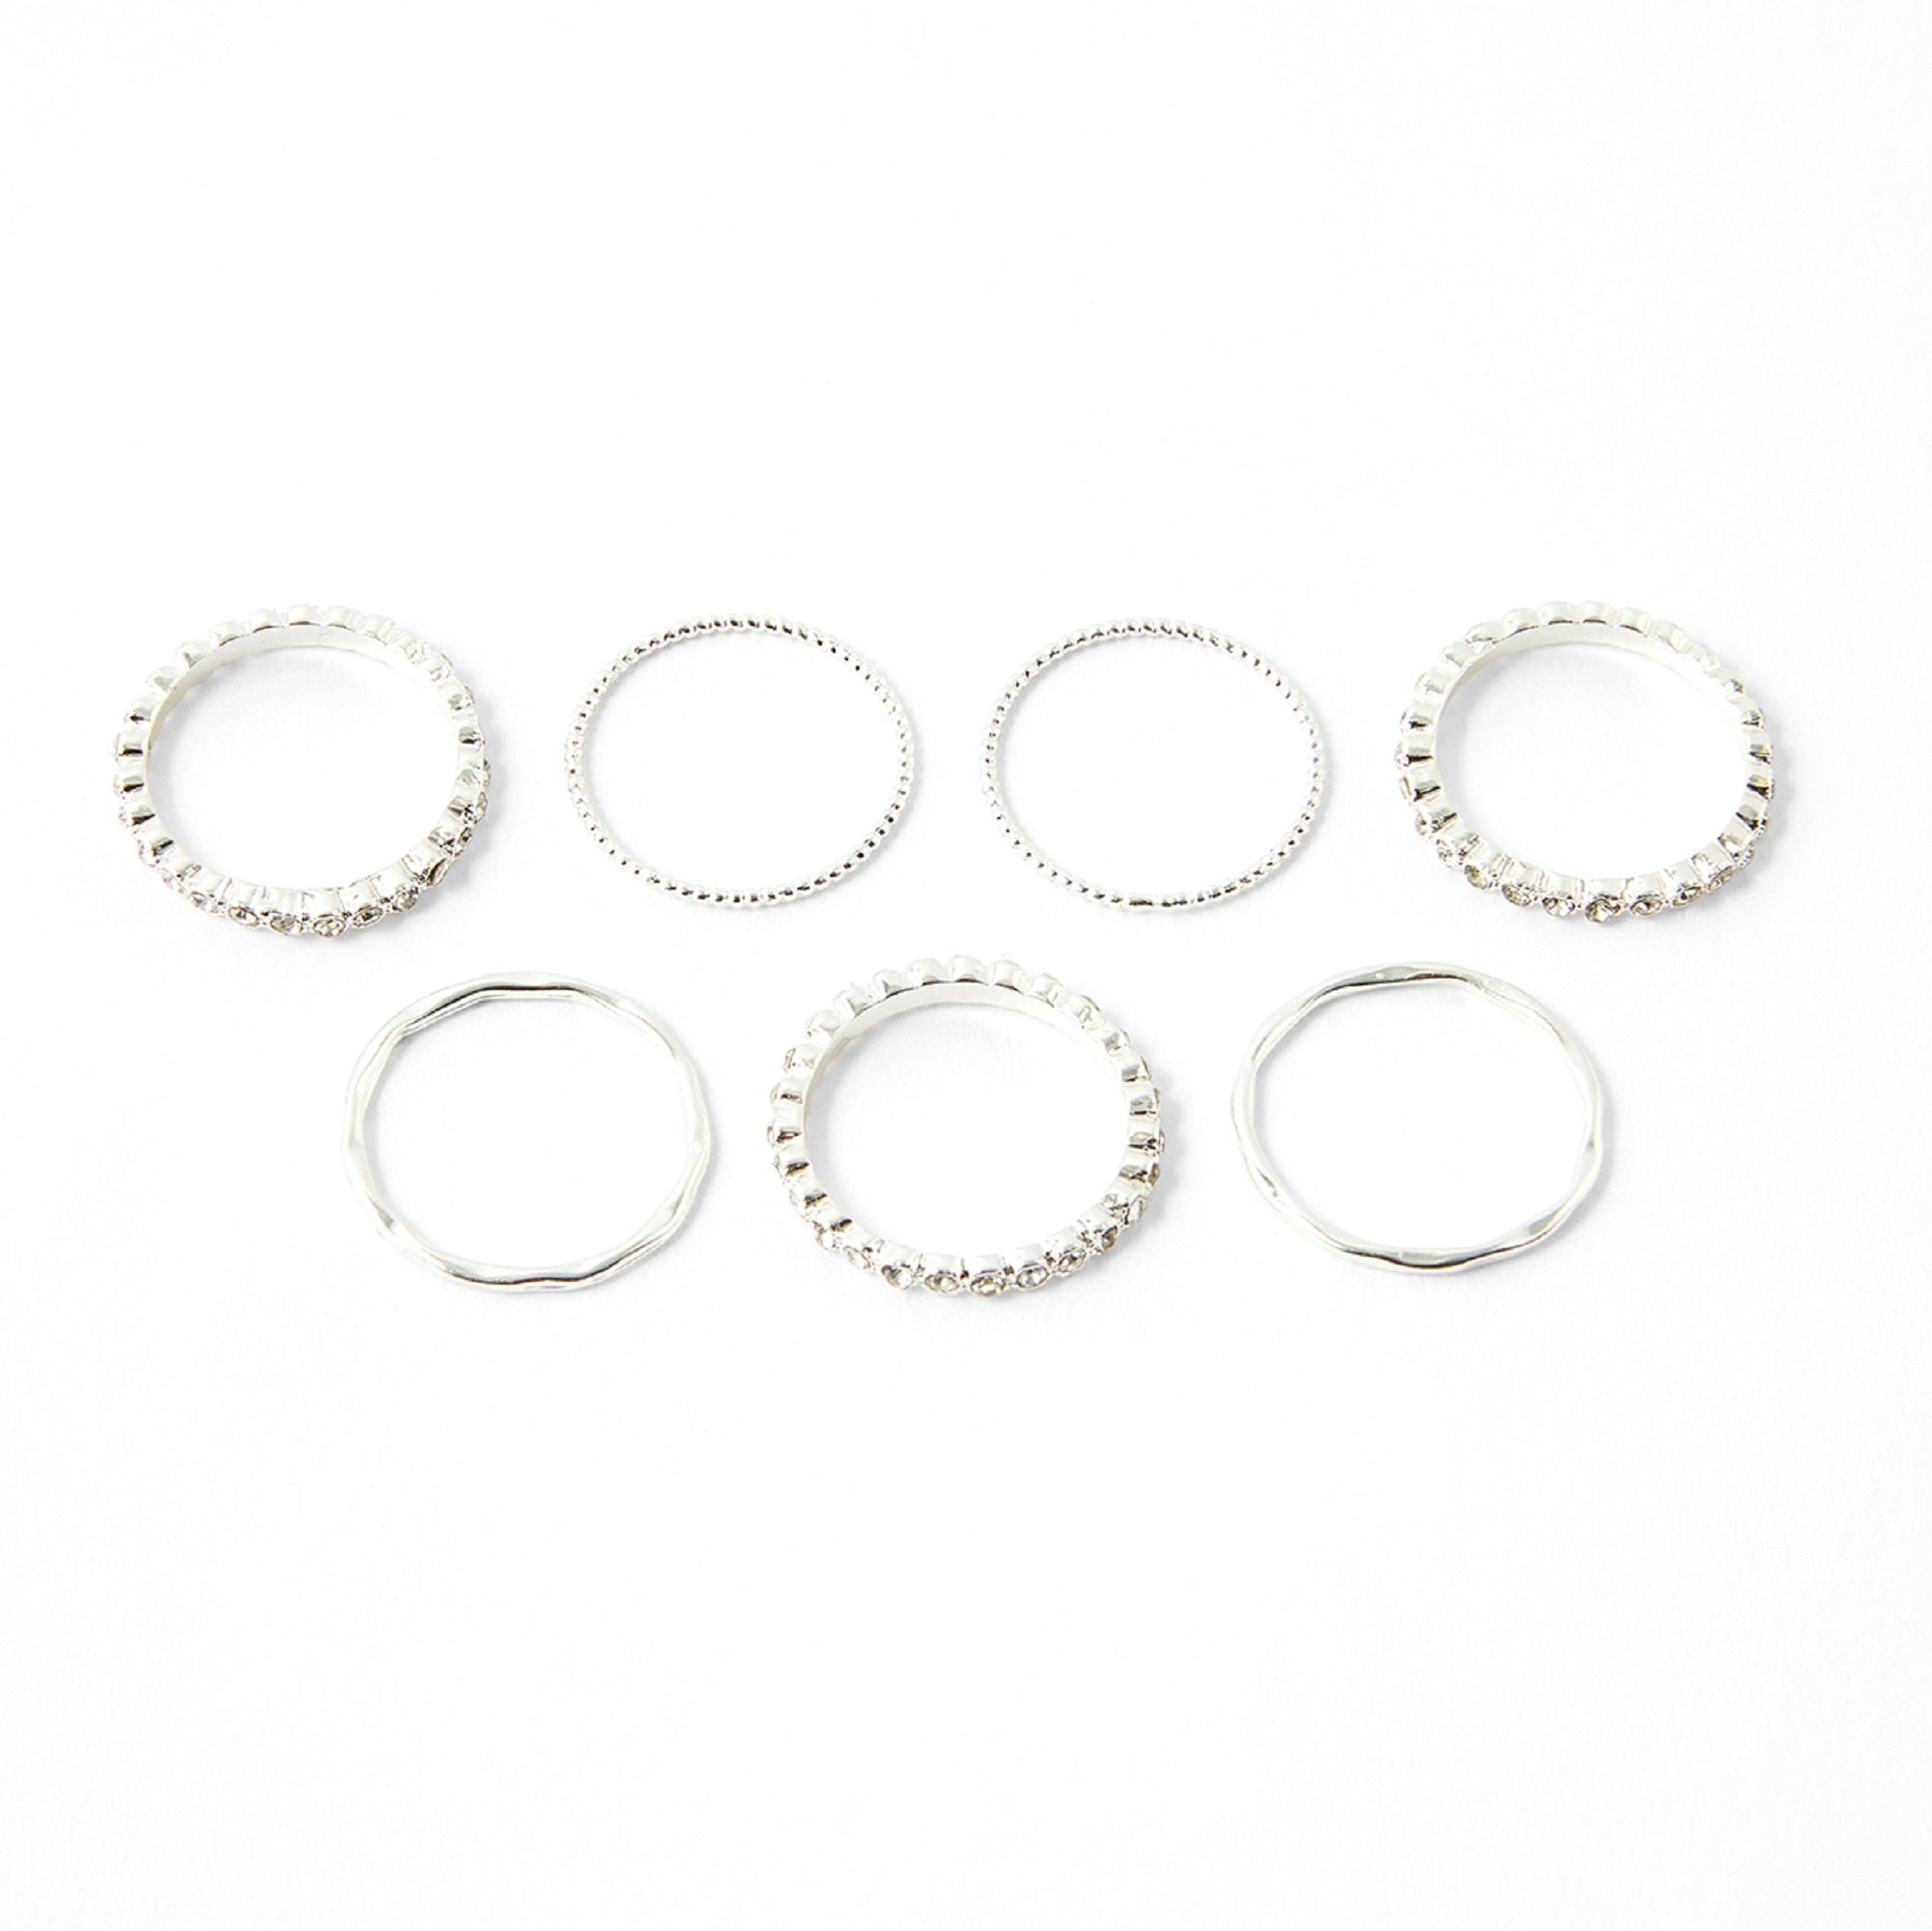 Accessorize London Women's Silver set of 7 Pave Organic Stacking Rings-Small